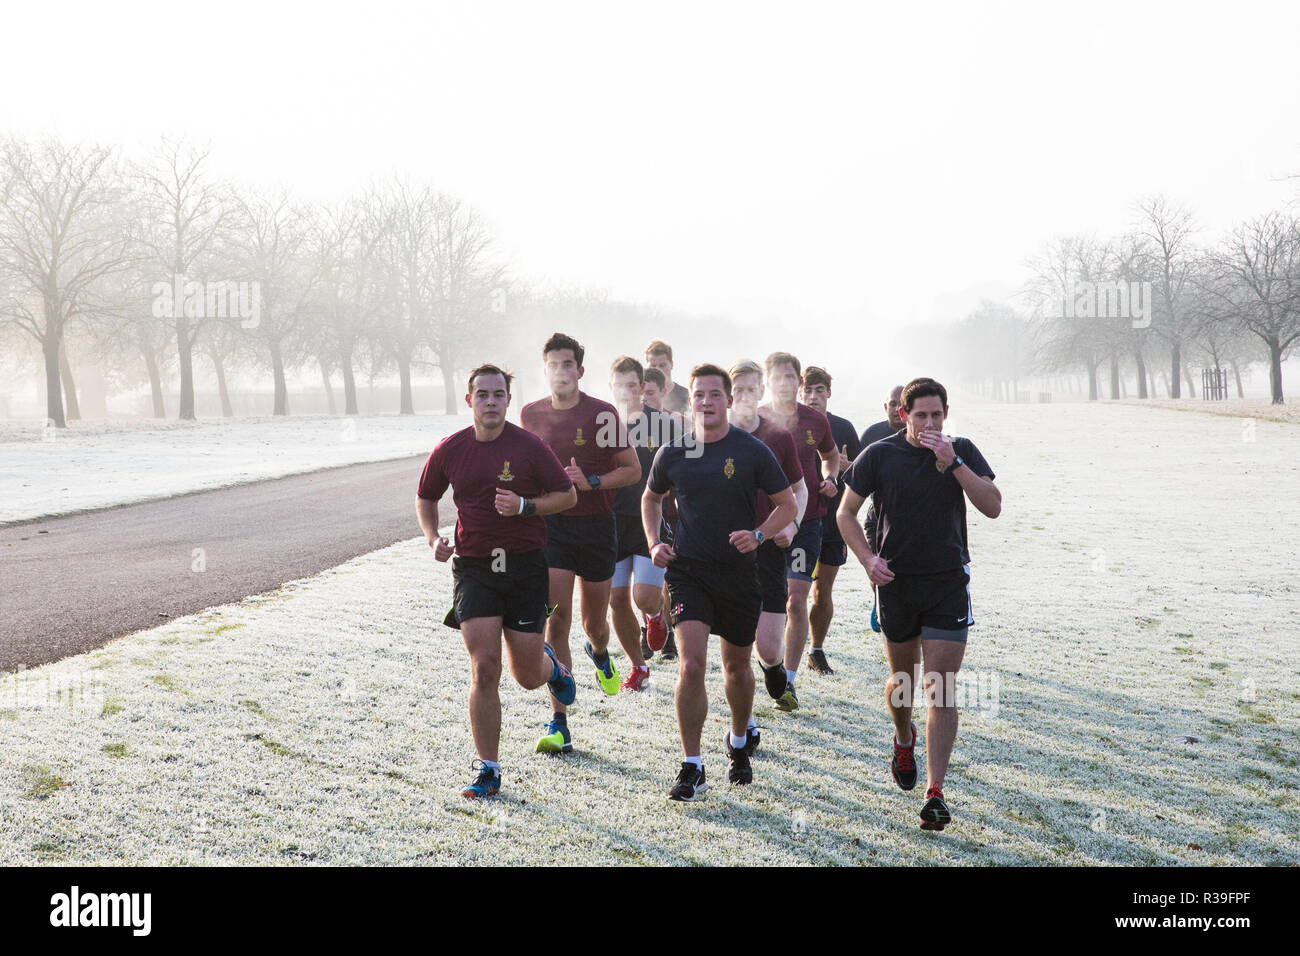 Windsor, UK. 22nd November, 2018. Soldiers train in heavy frost and foggy conditions alongside the Long Walk in Windsor Great Park. After the coldest night since February, there was widespread frost and freezing fog in Berkshire this morning but temperatures are expected to rise for a few days from tomorrow to more normal temperatures for November. Credit: Mark Kerrison/Alamy Live News Stock Photo